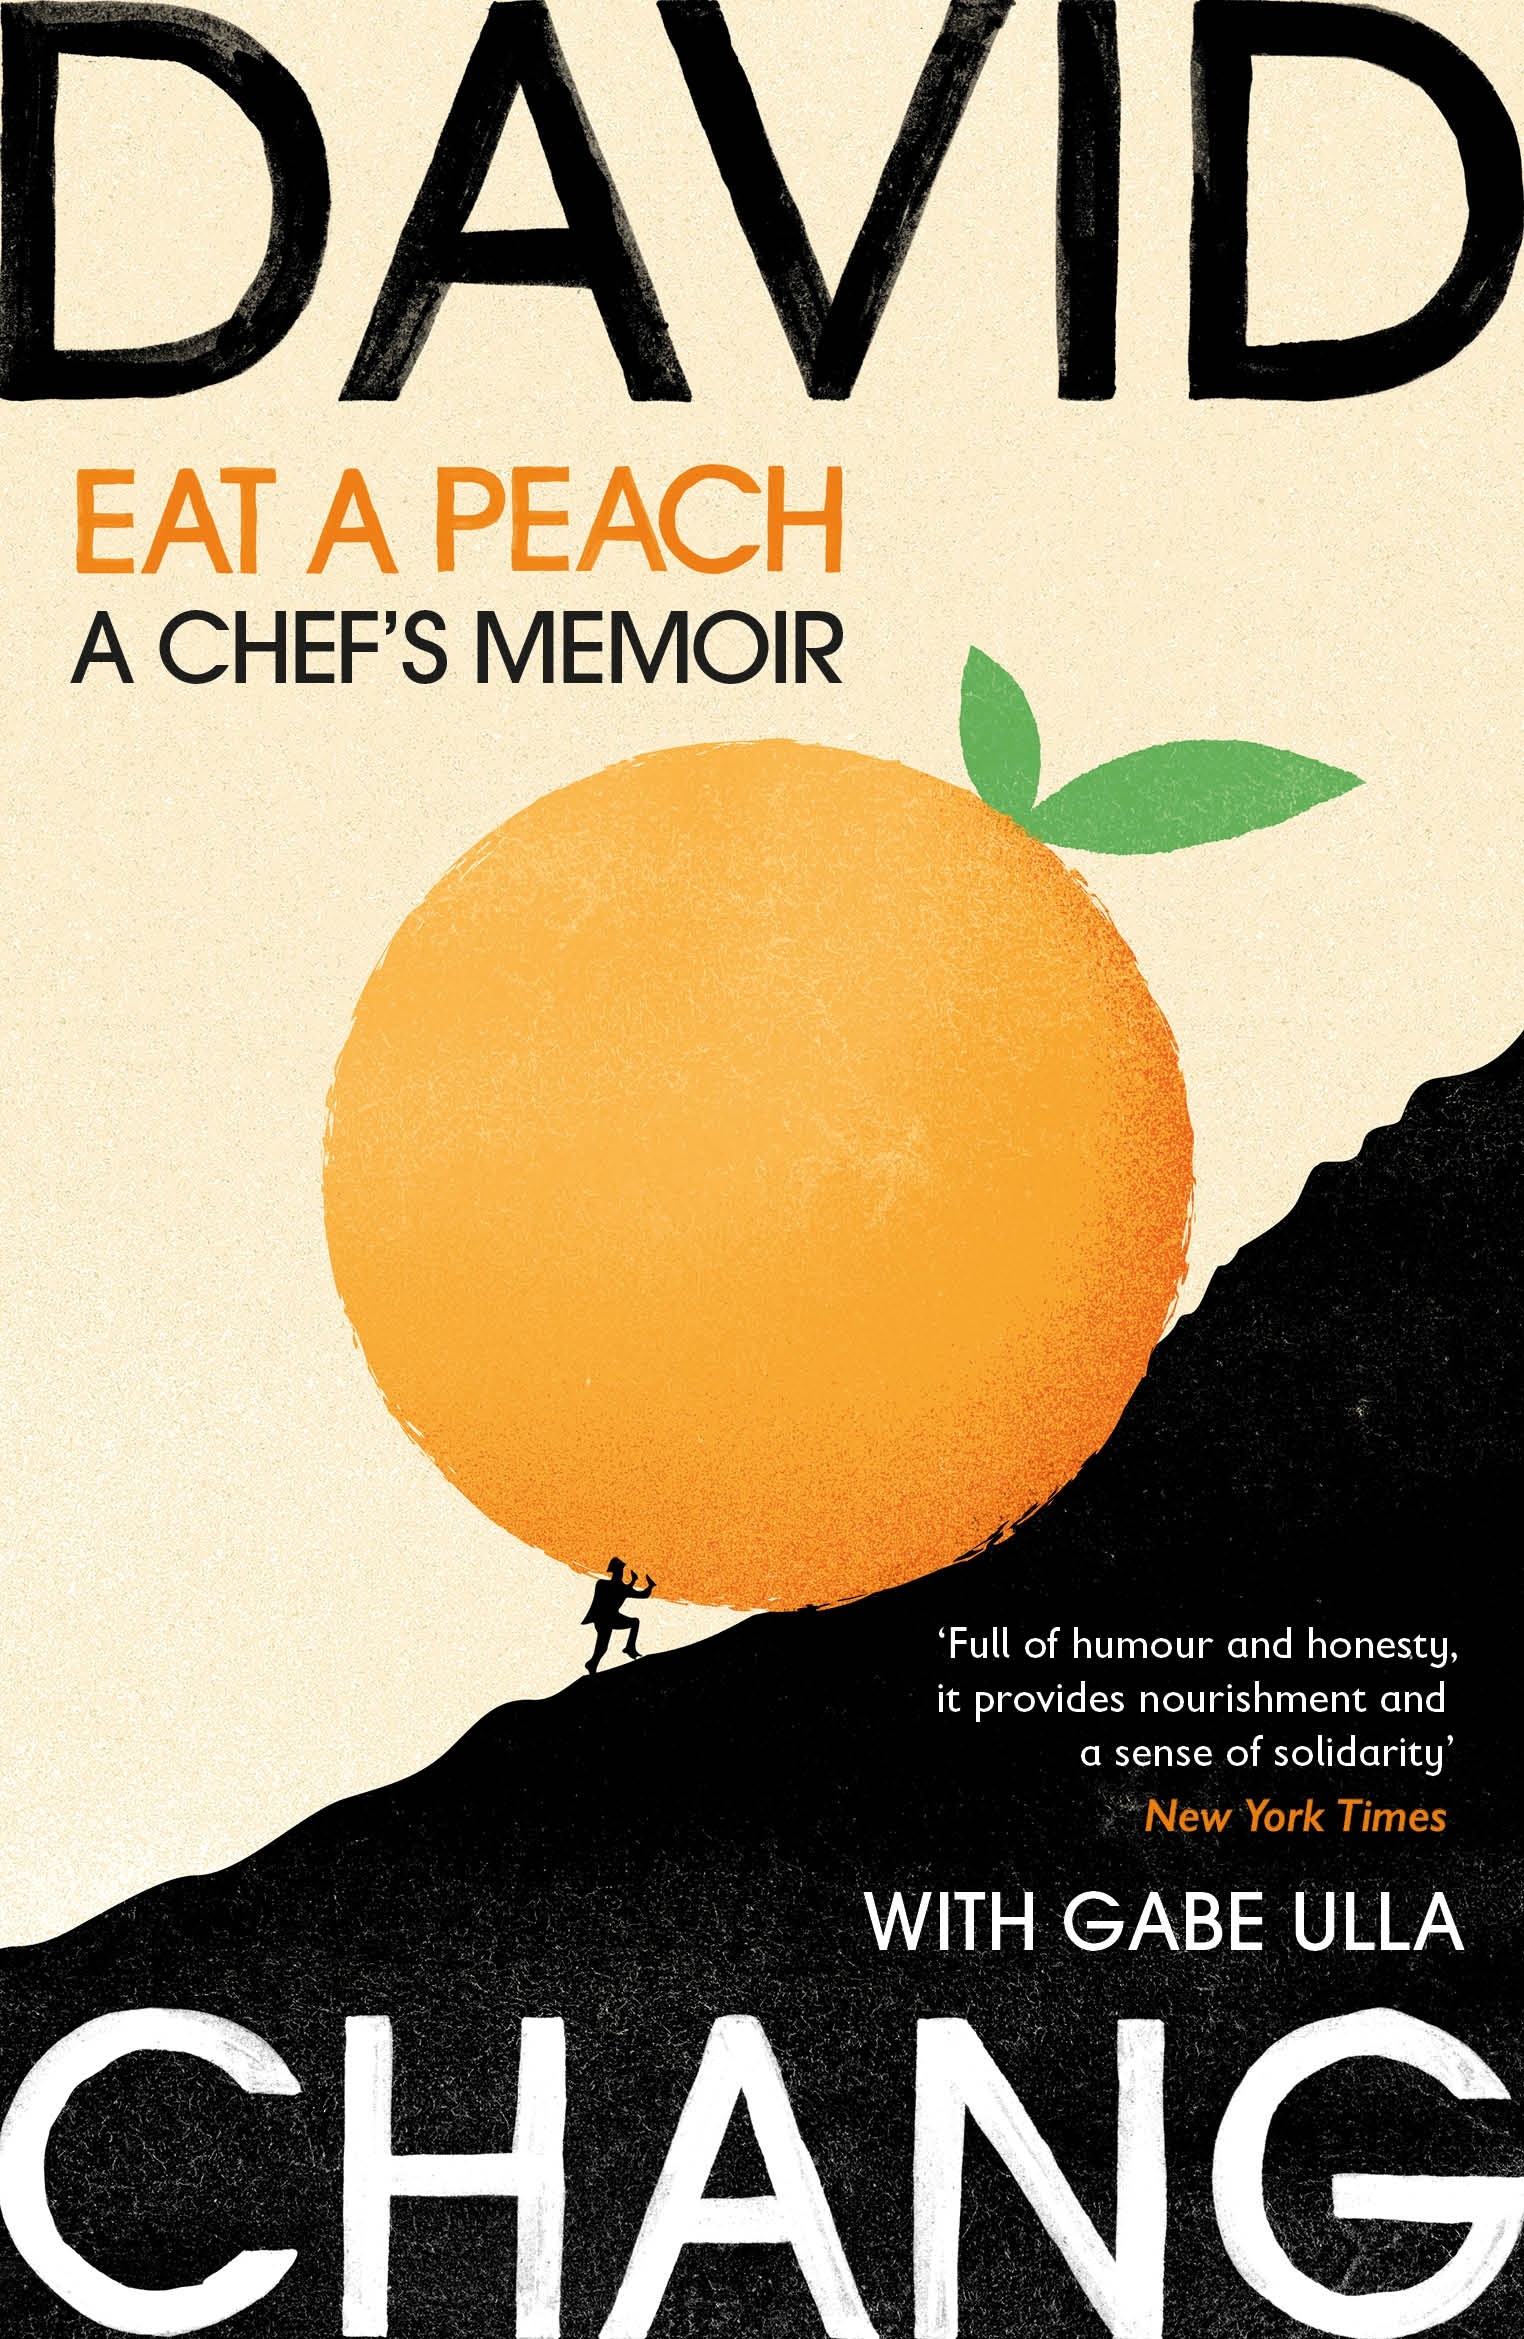 Book “Eat A Peach” by David Chang — February 3, 2022